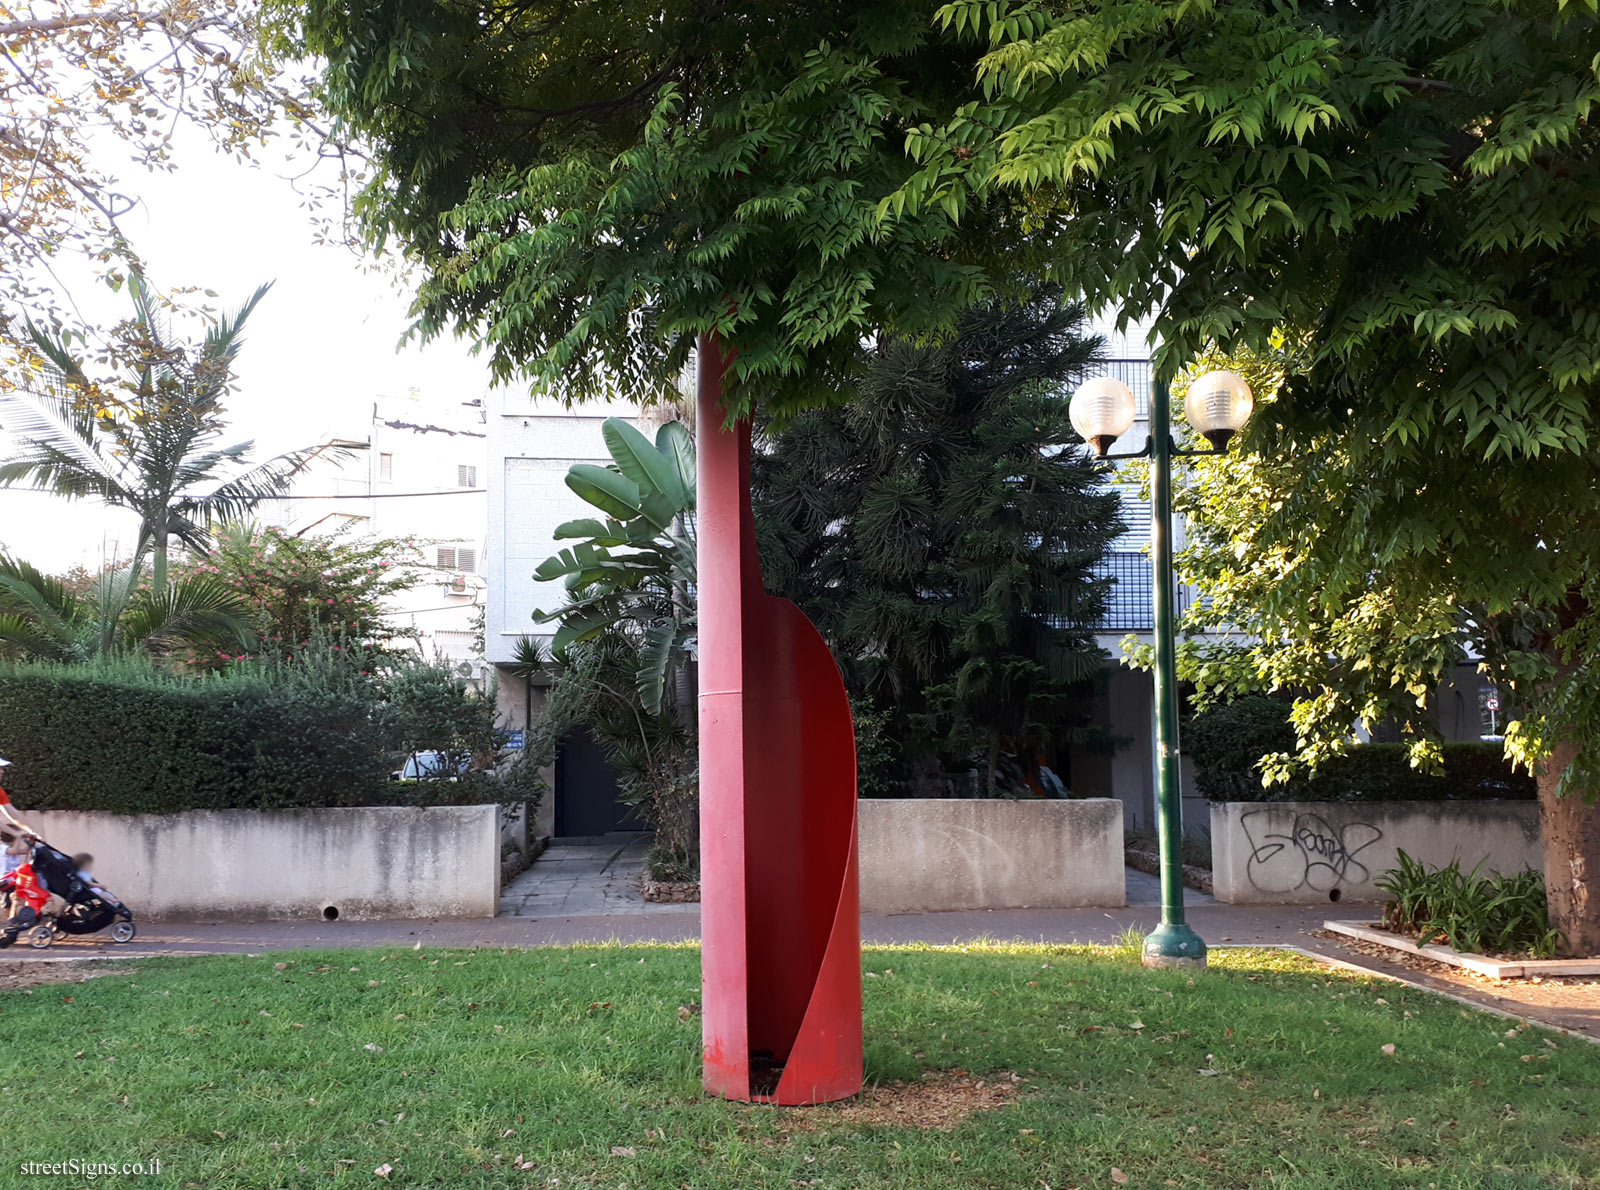 Tel Aviv - "Crown and Gown" - Outdoor sculpture by Michael Gross - Pinkas St 30, Tel Aviv-Yafo, Israel